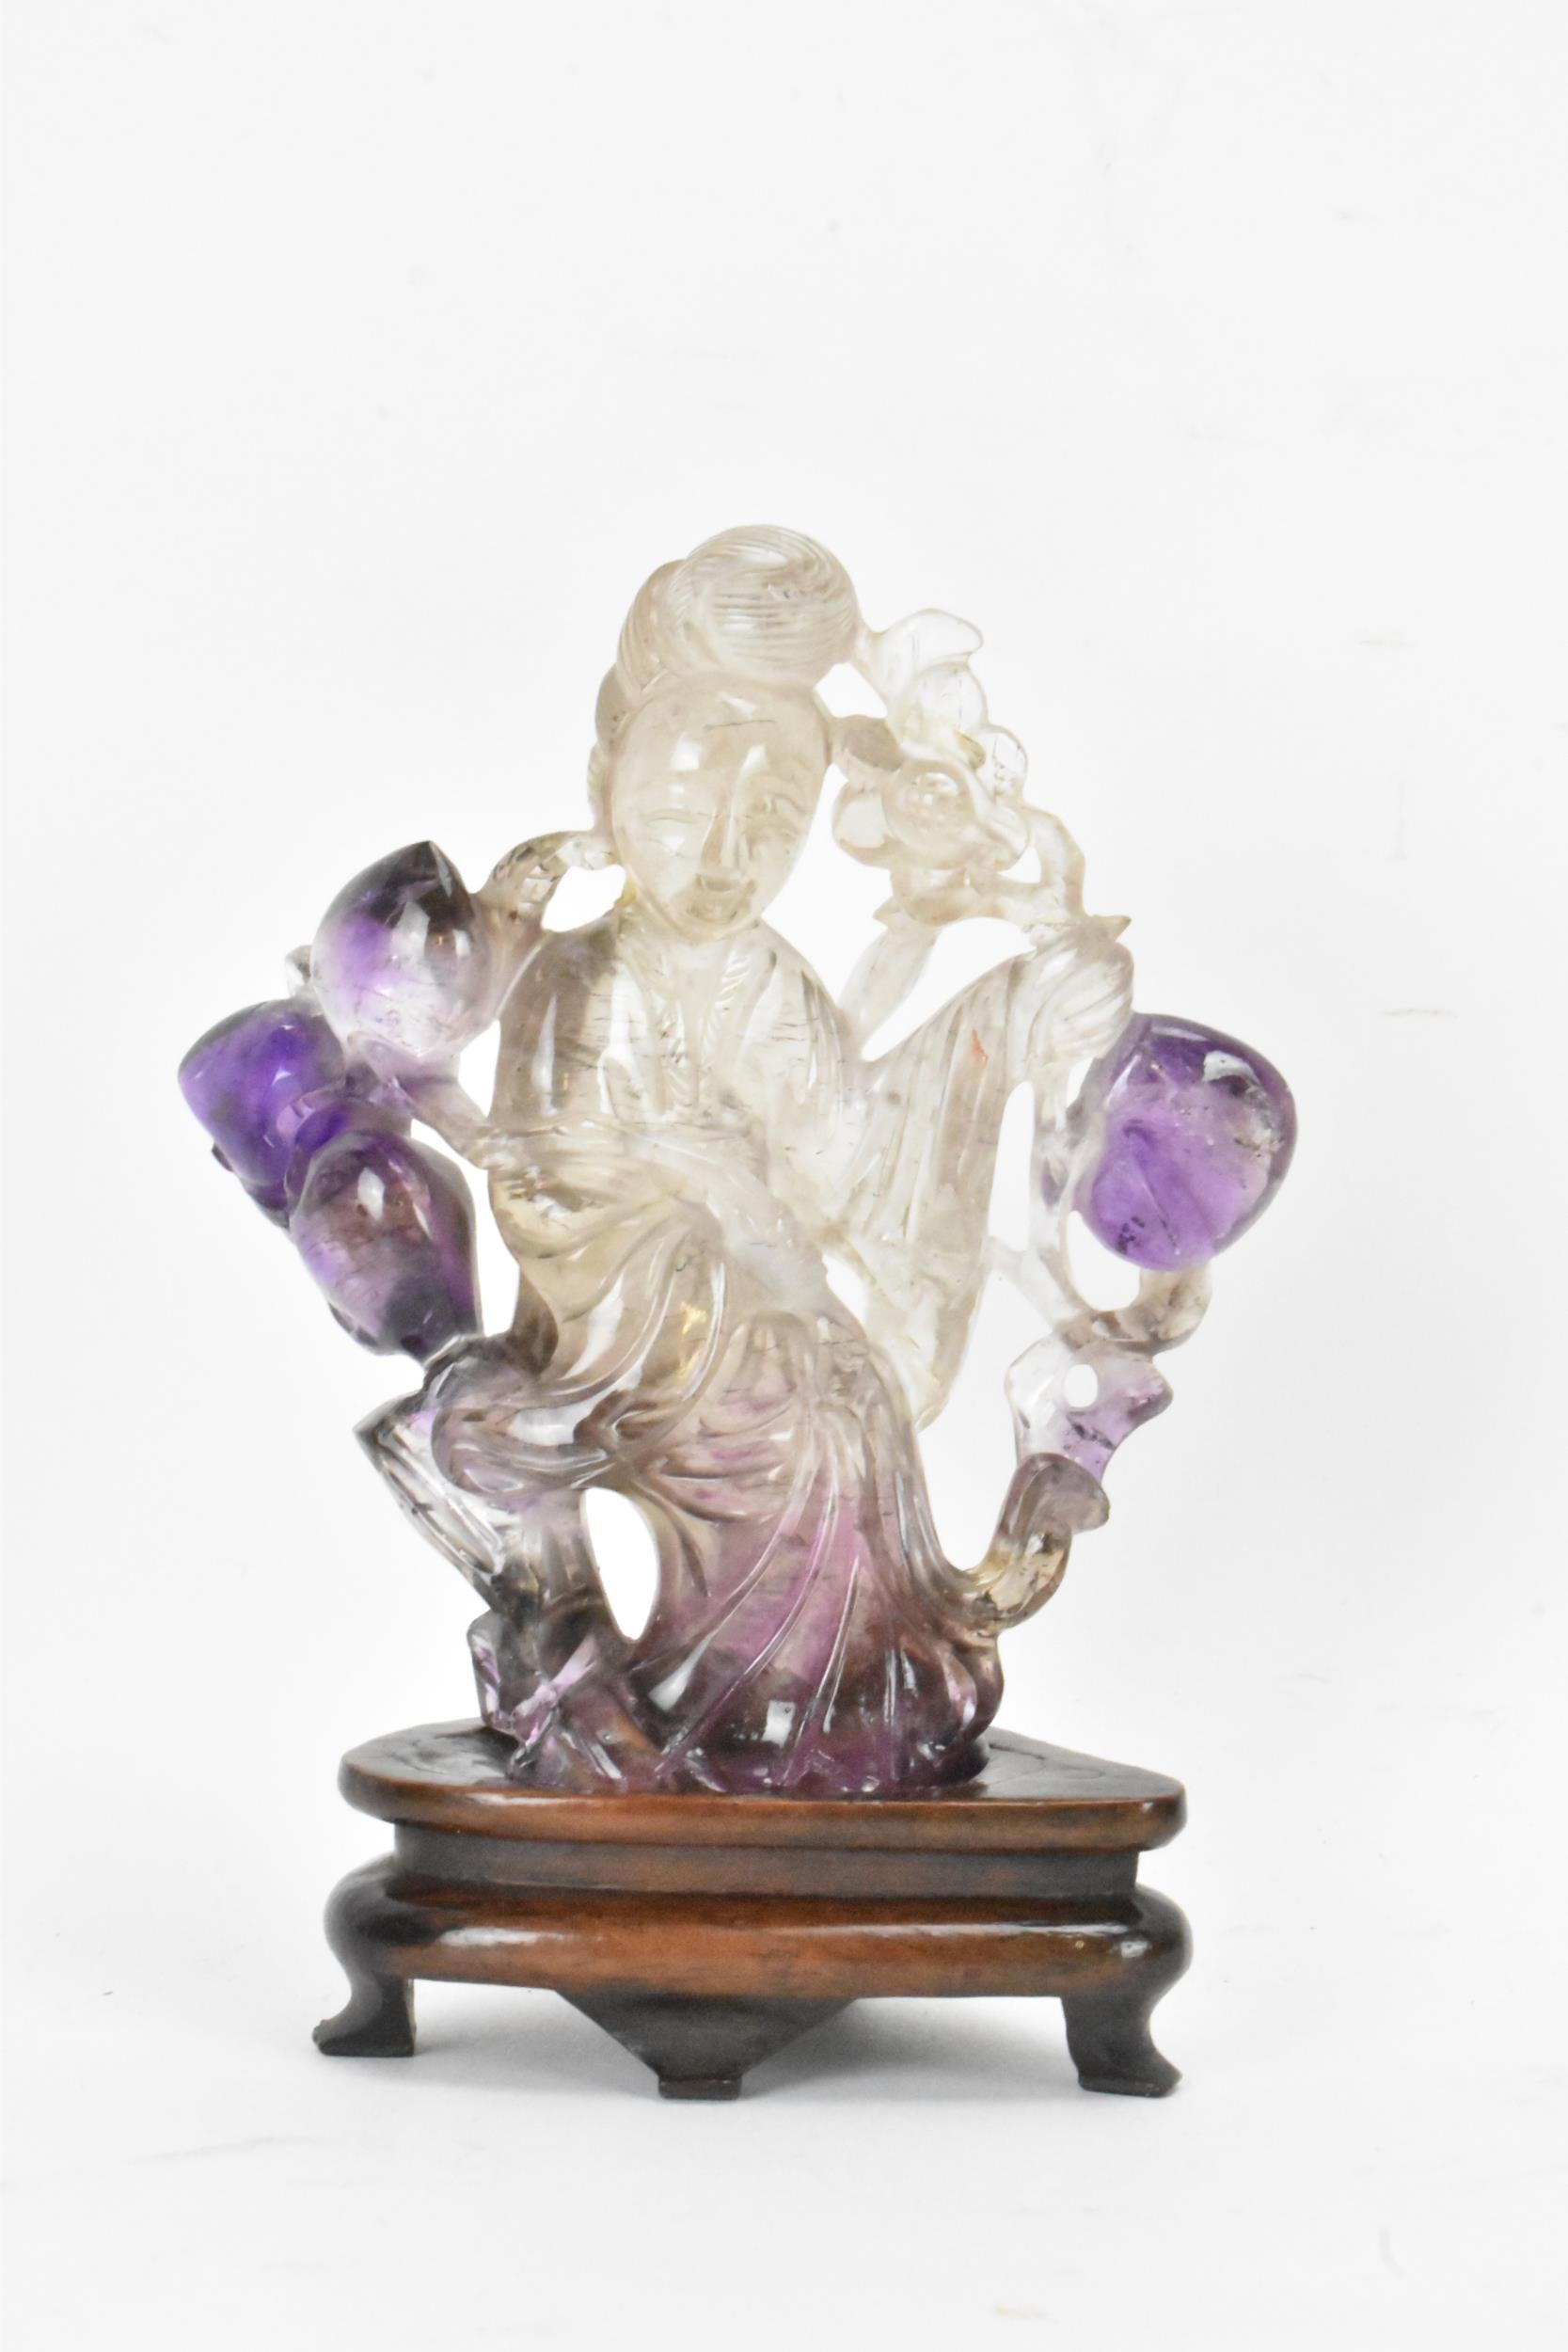 A 20th century Chinese carved amethyst figure of Guanyin, the goddess of mercy, in a seated position